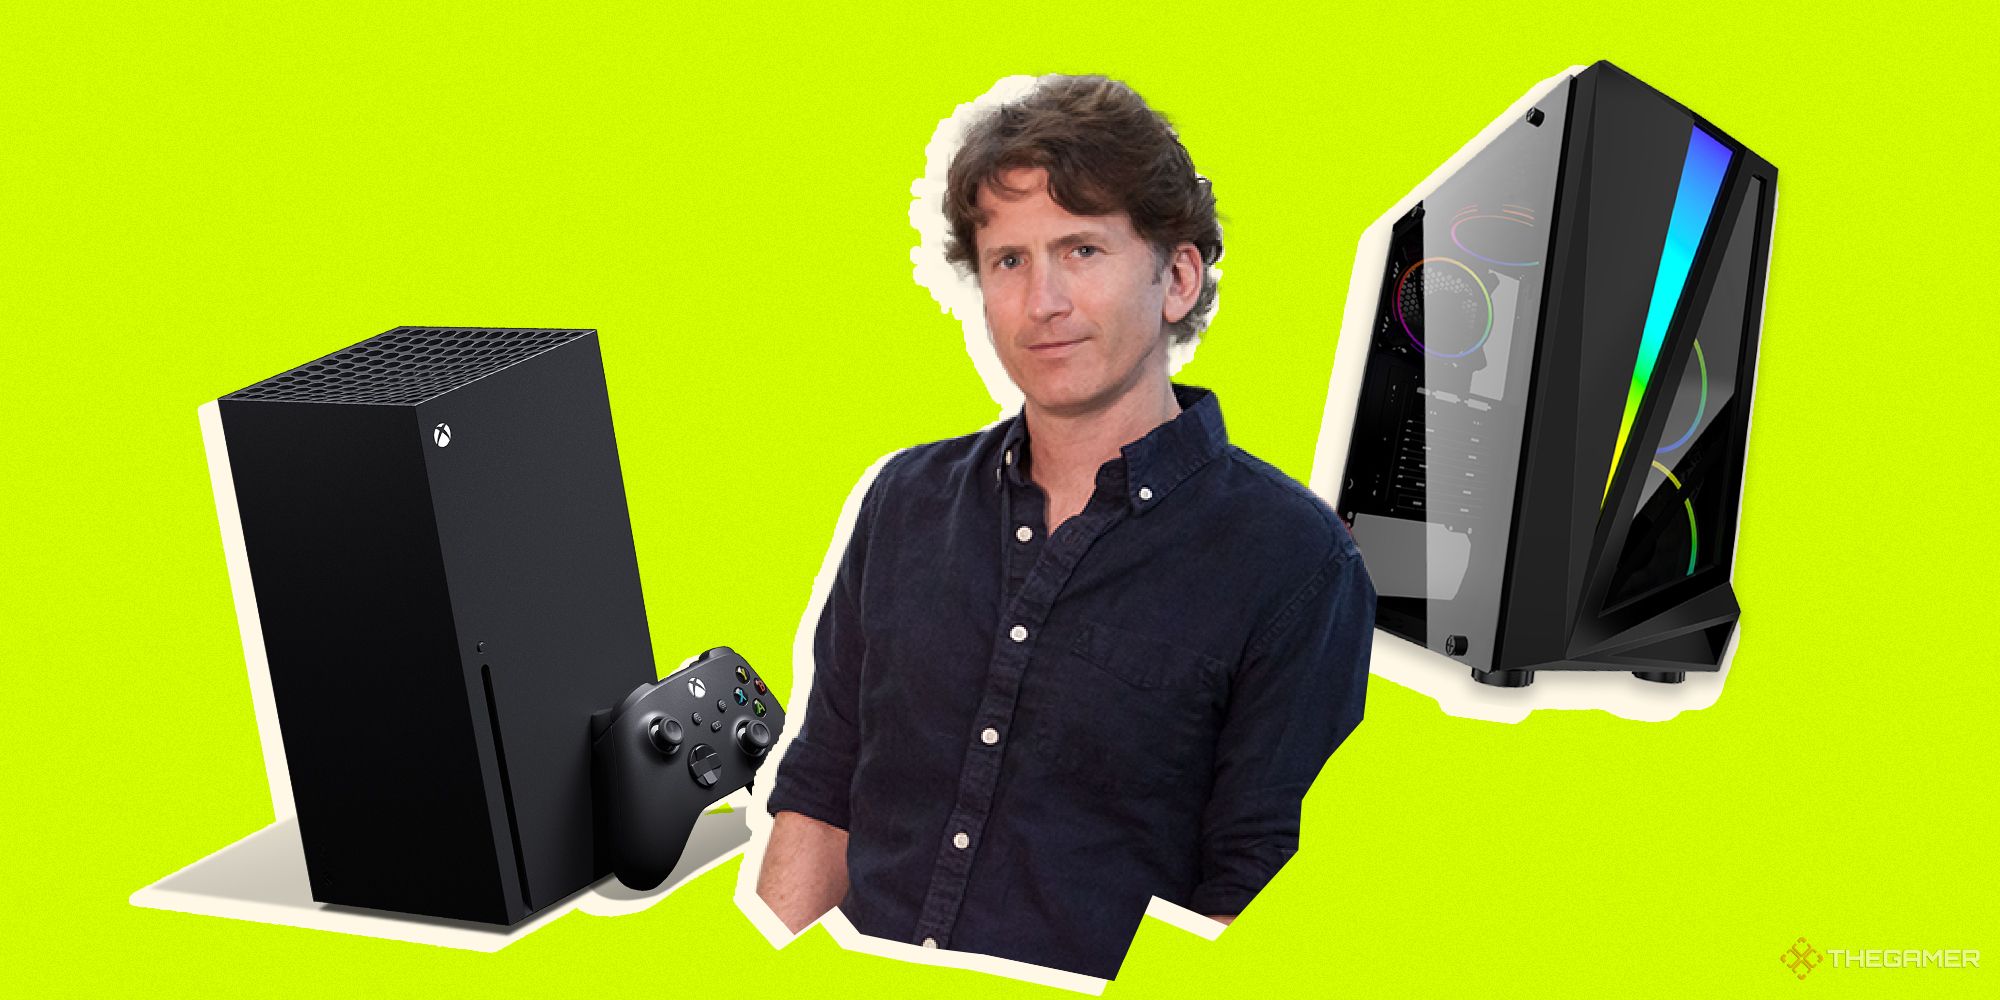 Todd Howard cutout over a lime green background with an Xbox Series X on the left and a gaming PC rig on the right